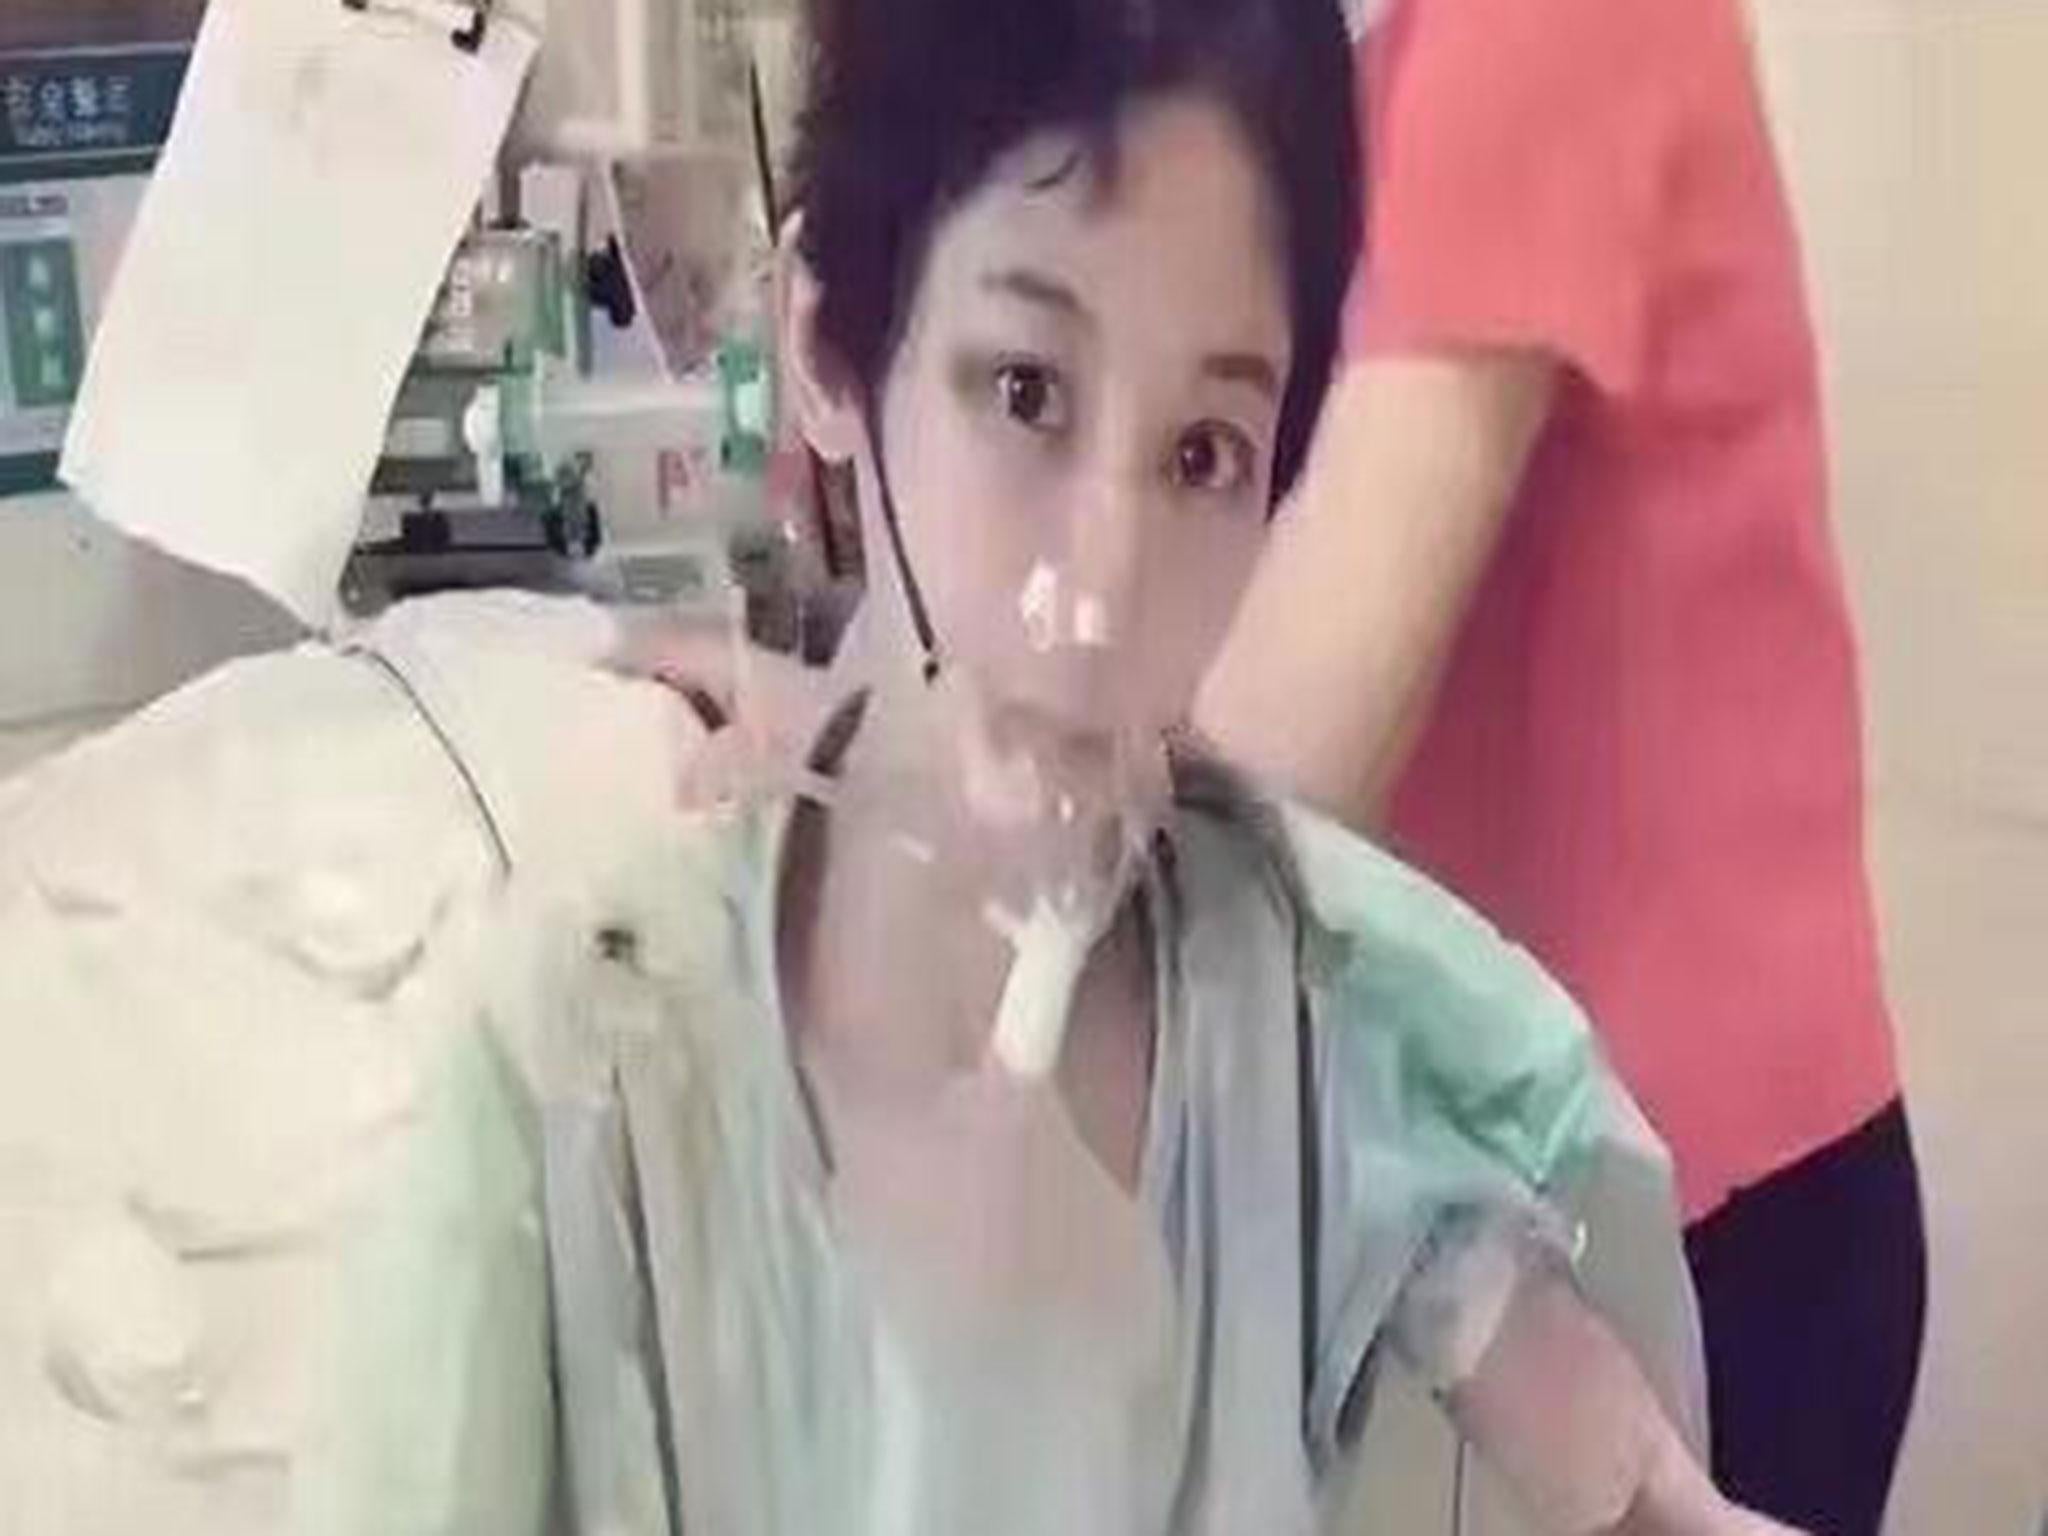 The actress shared pictures of herself being treated in hospital